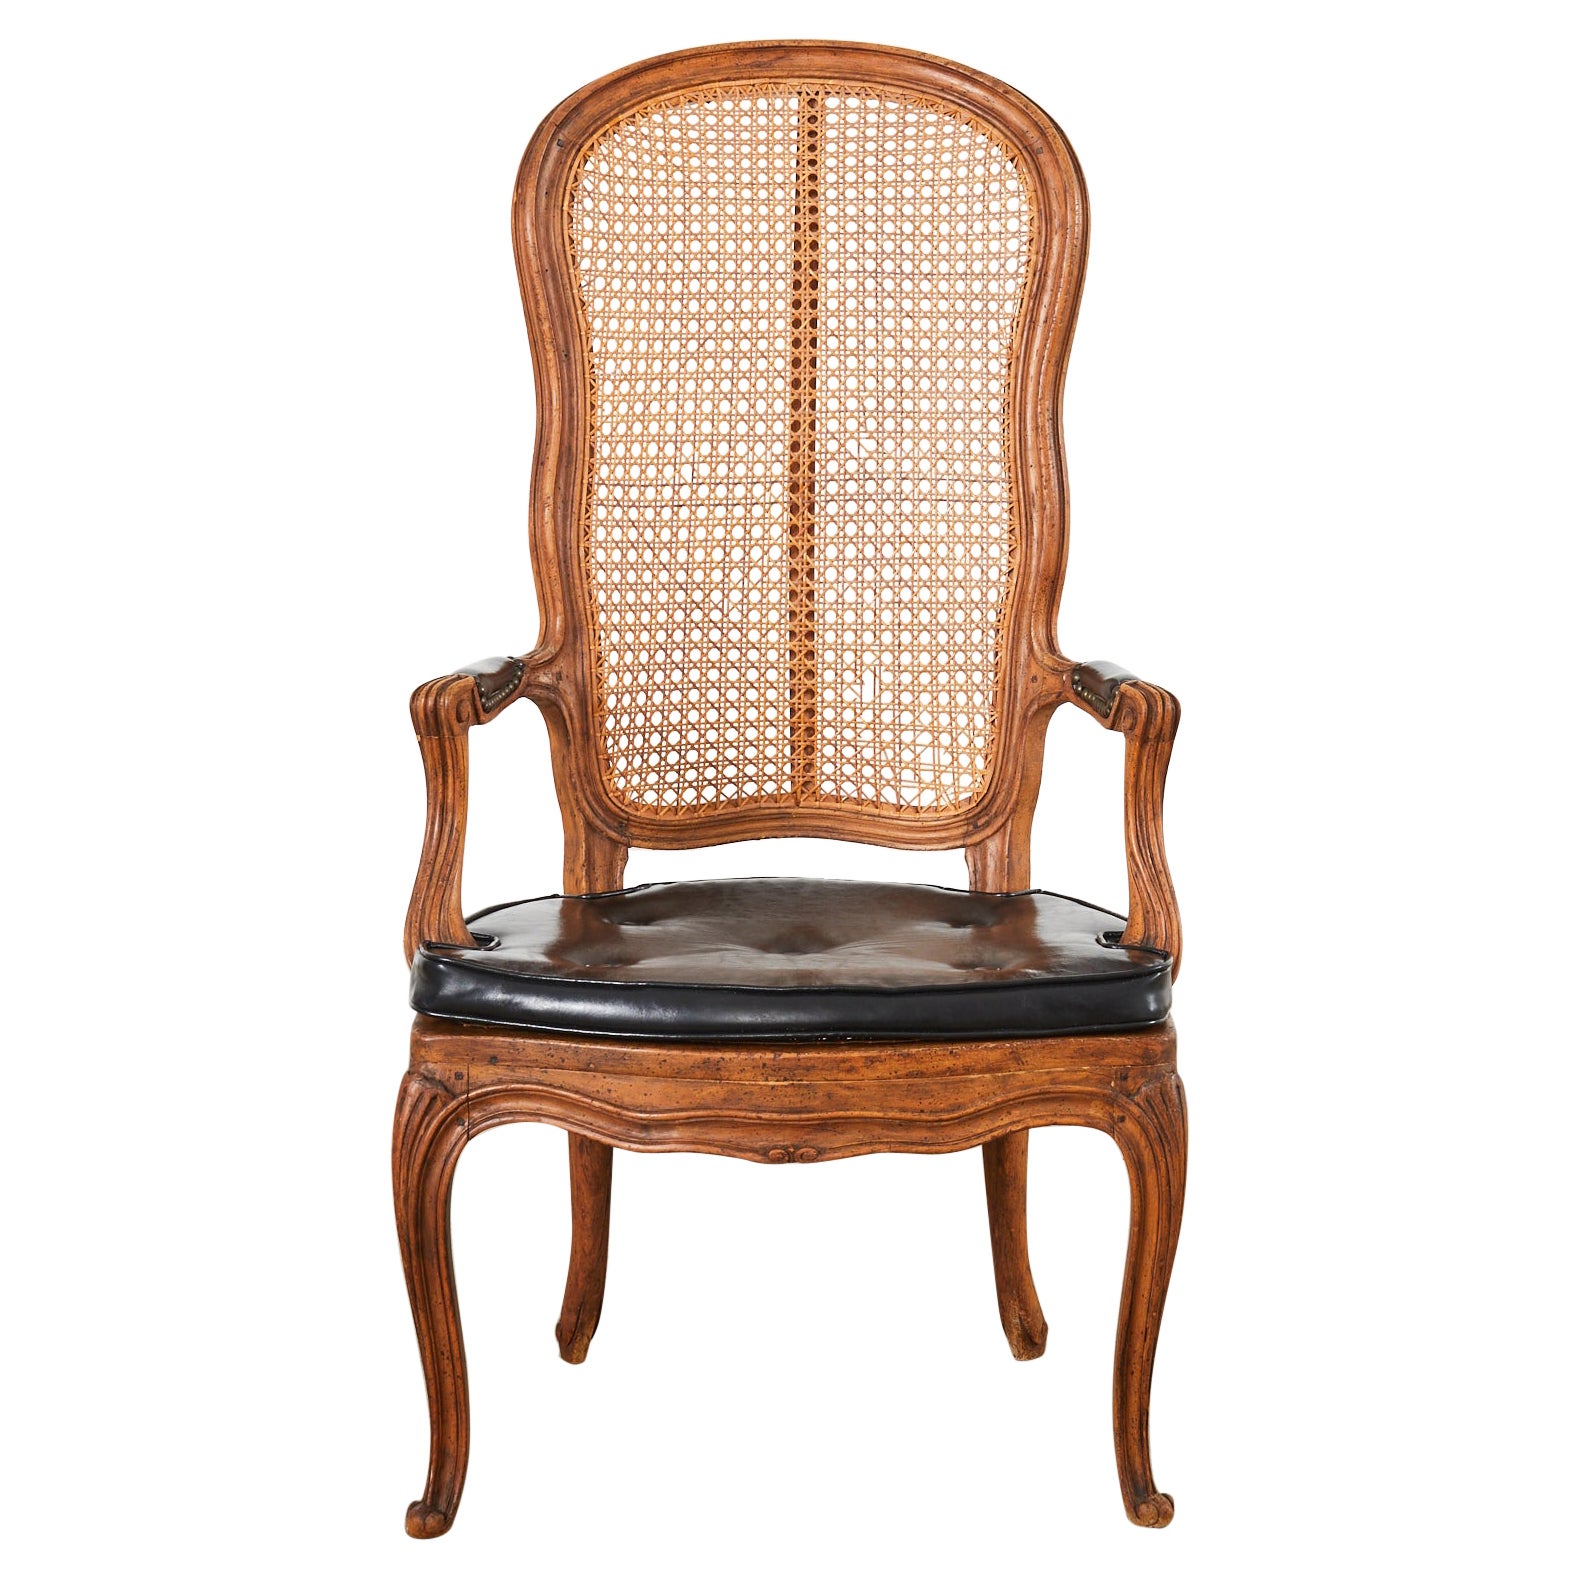 19th Century Louis XV Style Walnut and Cane Fauteuil Armchair For Sale